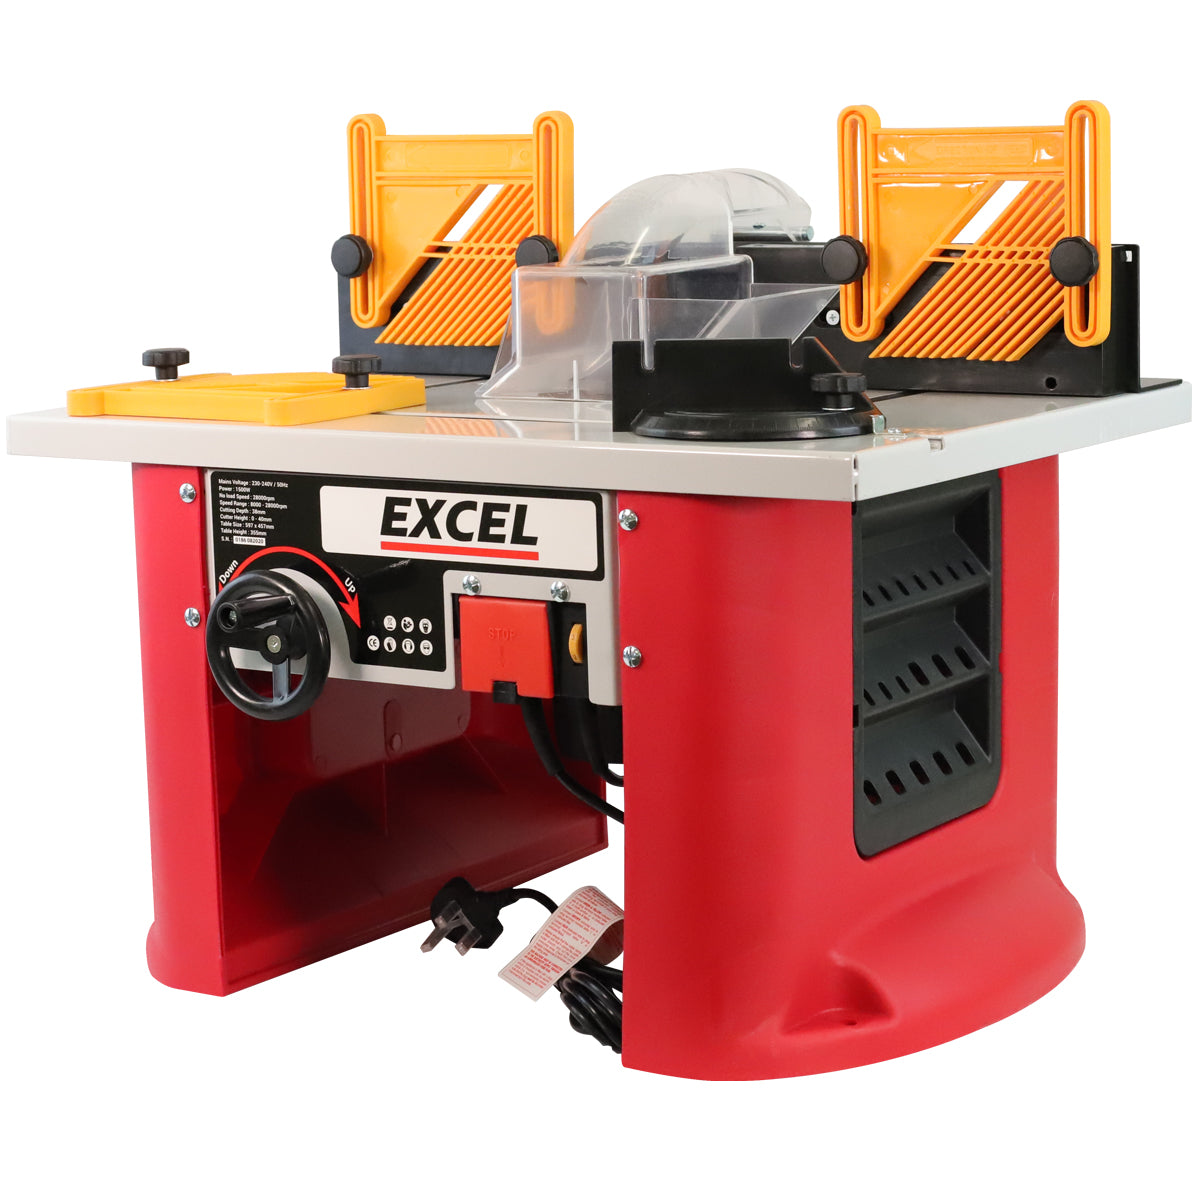 Excel Table Router Cutter 240V/1500W